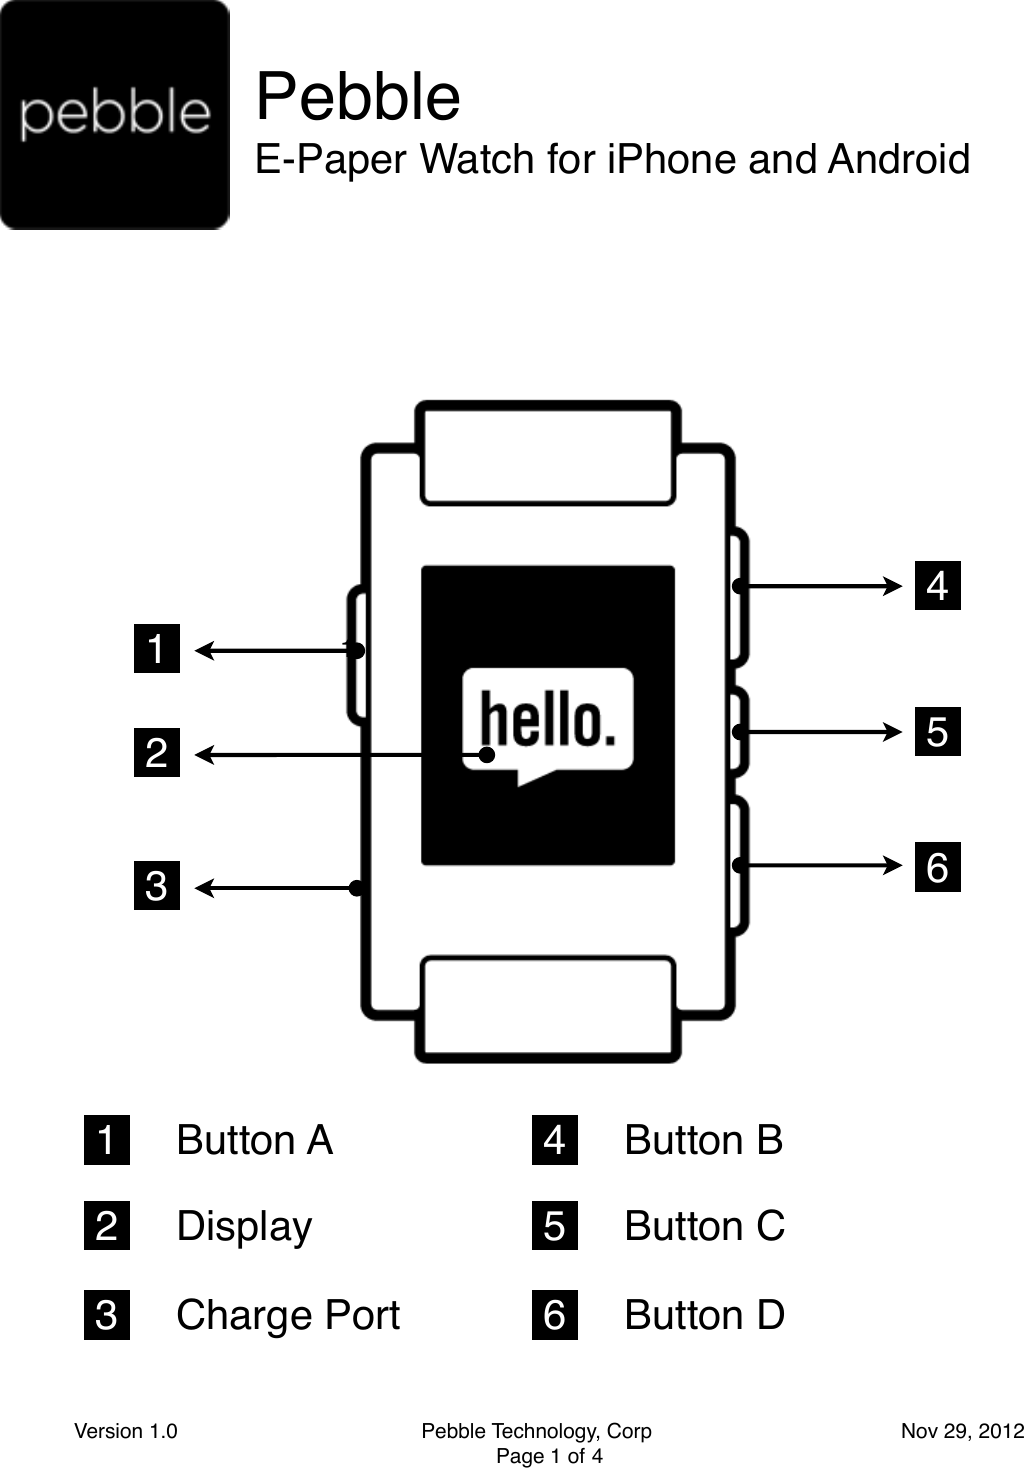 Pebble E-Paper Watch for iPhone and Android 1   4   1 Version 1.0                                          Pebble Technology, Corp                                           Nov 29, 2012 Page 1 of 41 1  2  3  4  5  6  1     Button A 2     Display 3     Charge Port 4     Button B 5     Button C 6     Button D